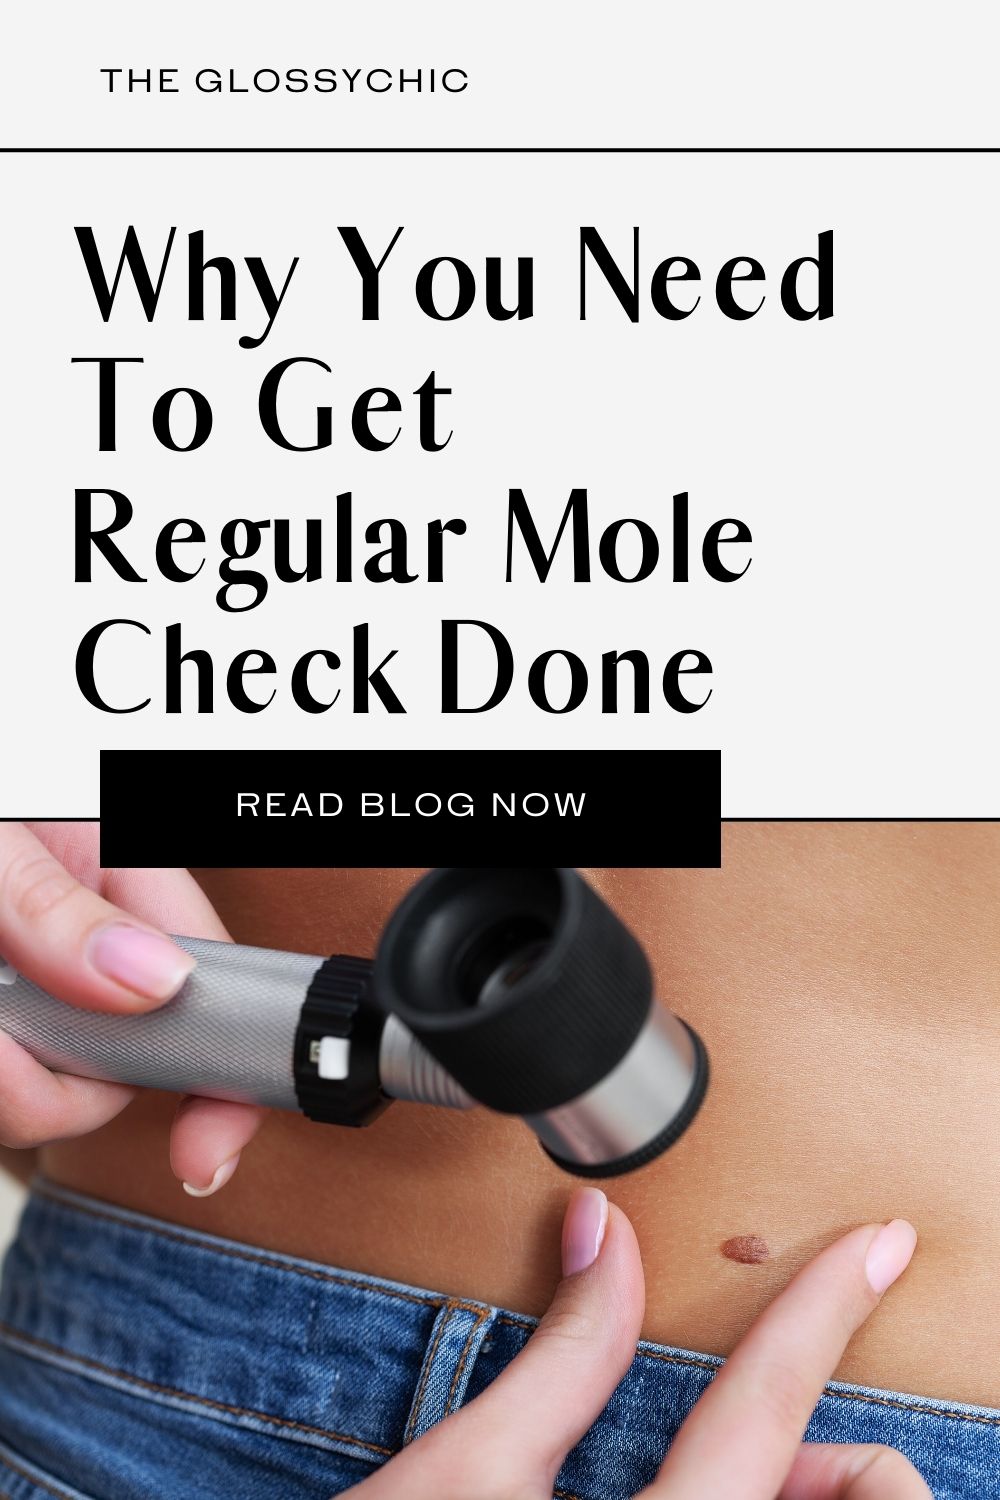 Why Do You Need To Get The Regular Mole Check Done?